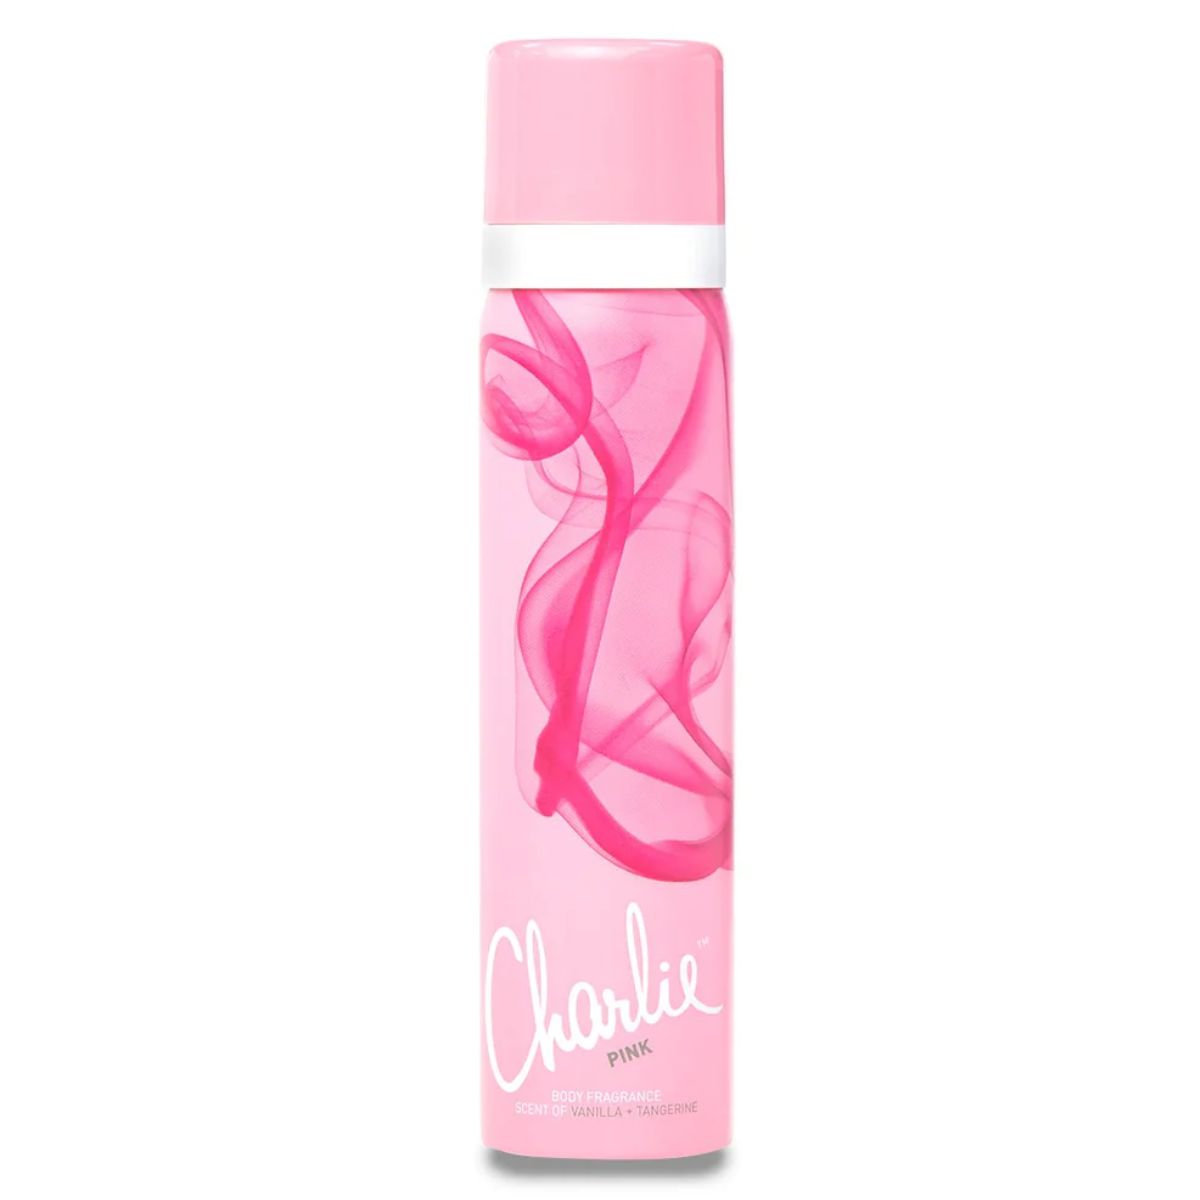 A Charlie - Body Spray Pink - 75ml bottle with pink smoke on it.